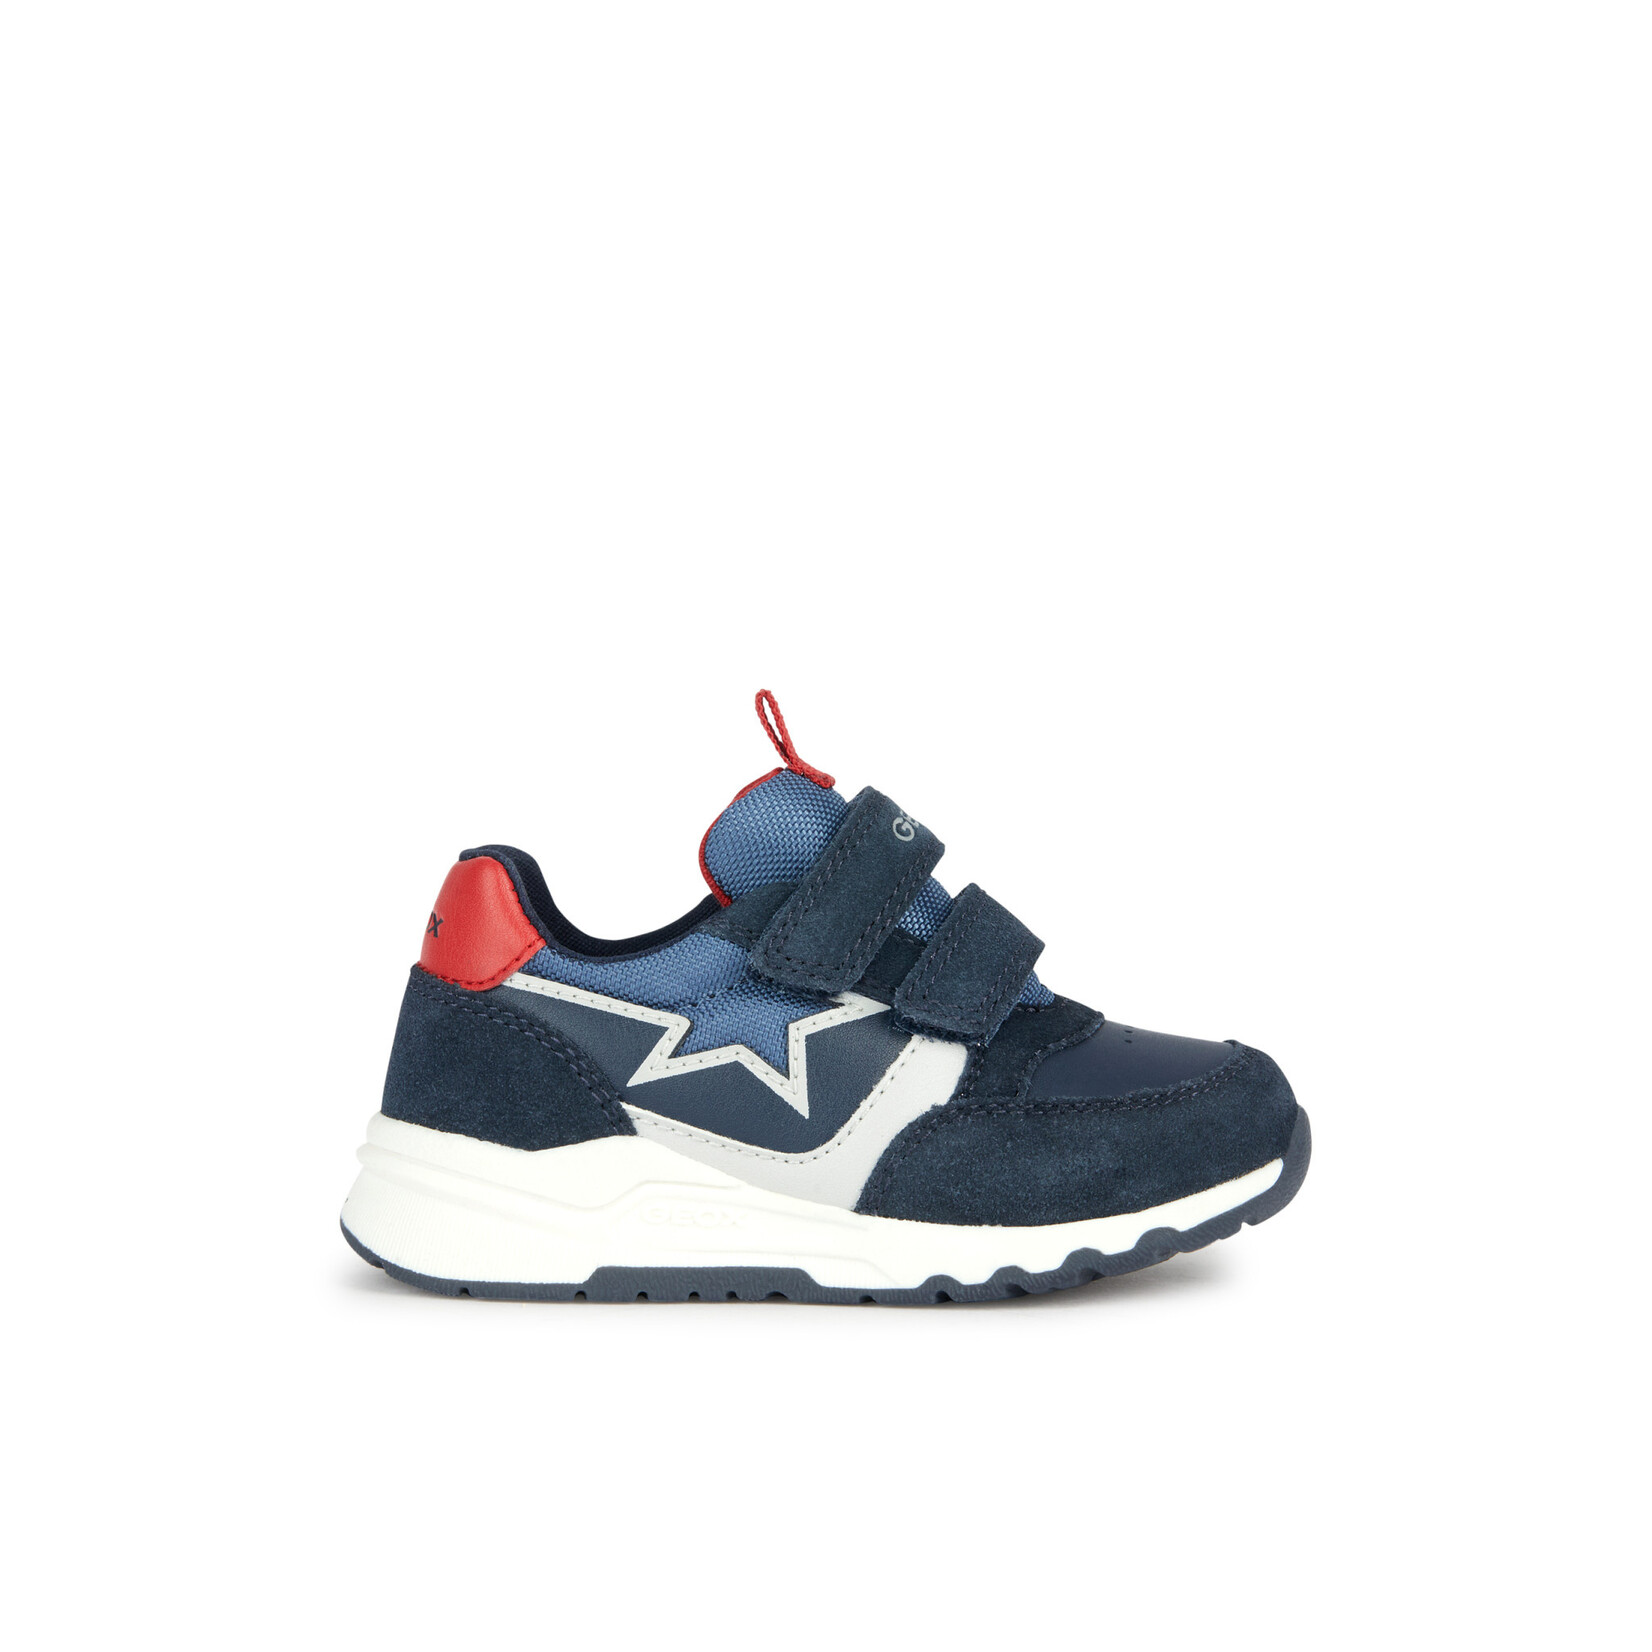 Geox GEOX - Sport Shoes 'B. PYRIP - Suede+Synt.Leather' - Navy/Red